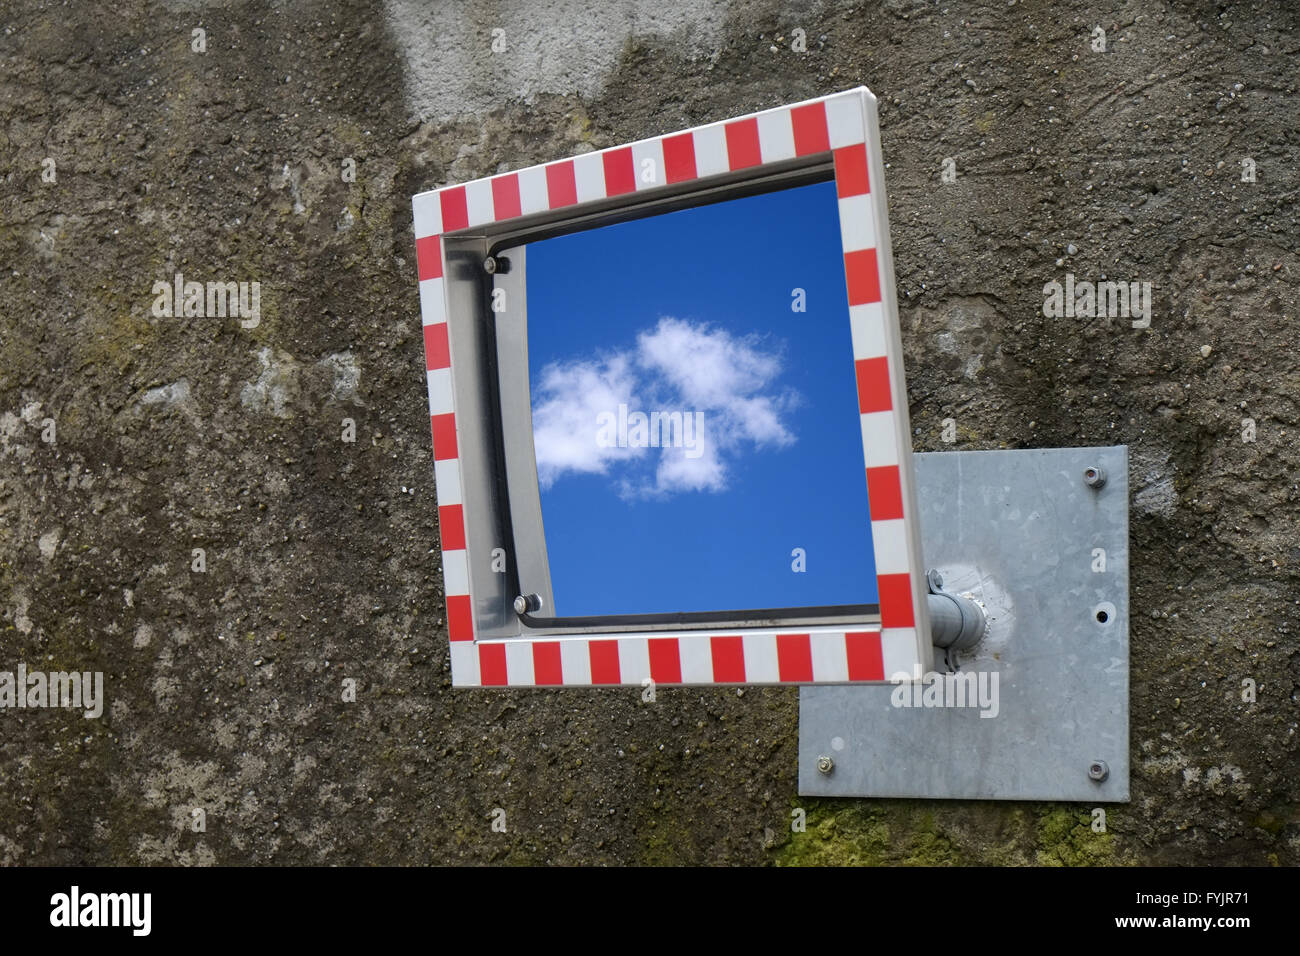 Traffic mirror with cloud refelection Stock Photo